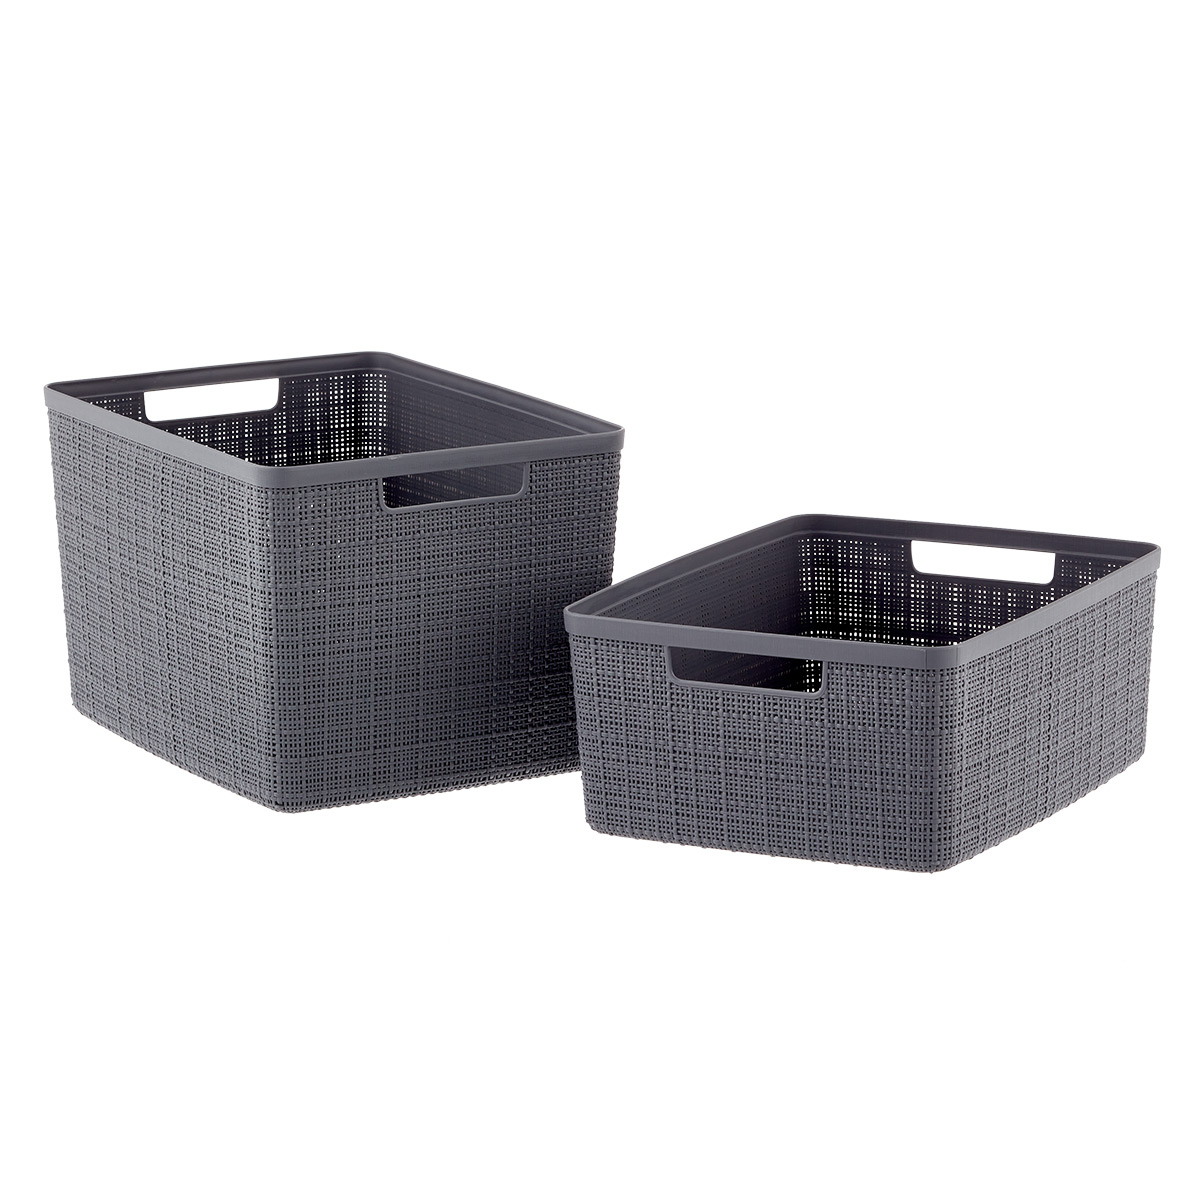 Curver Jute Basket | The Container Store